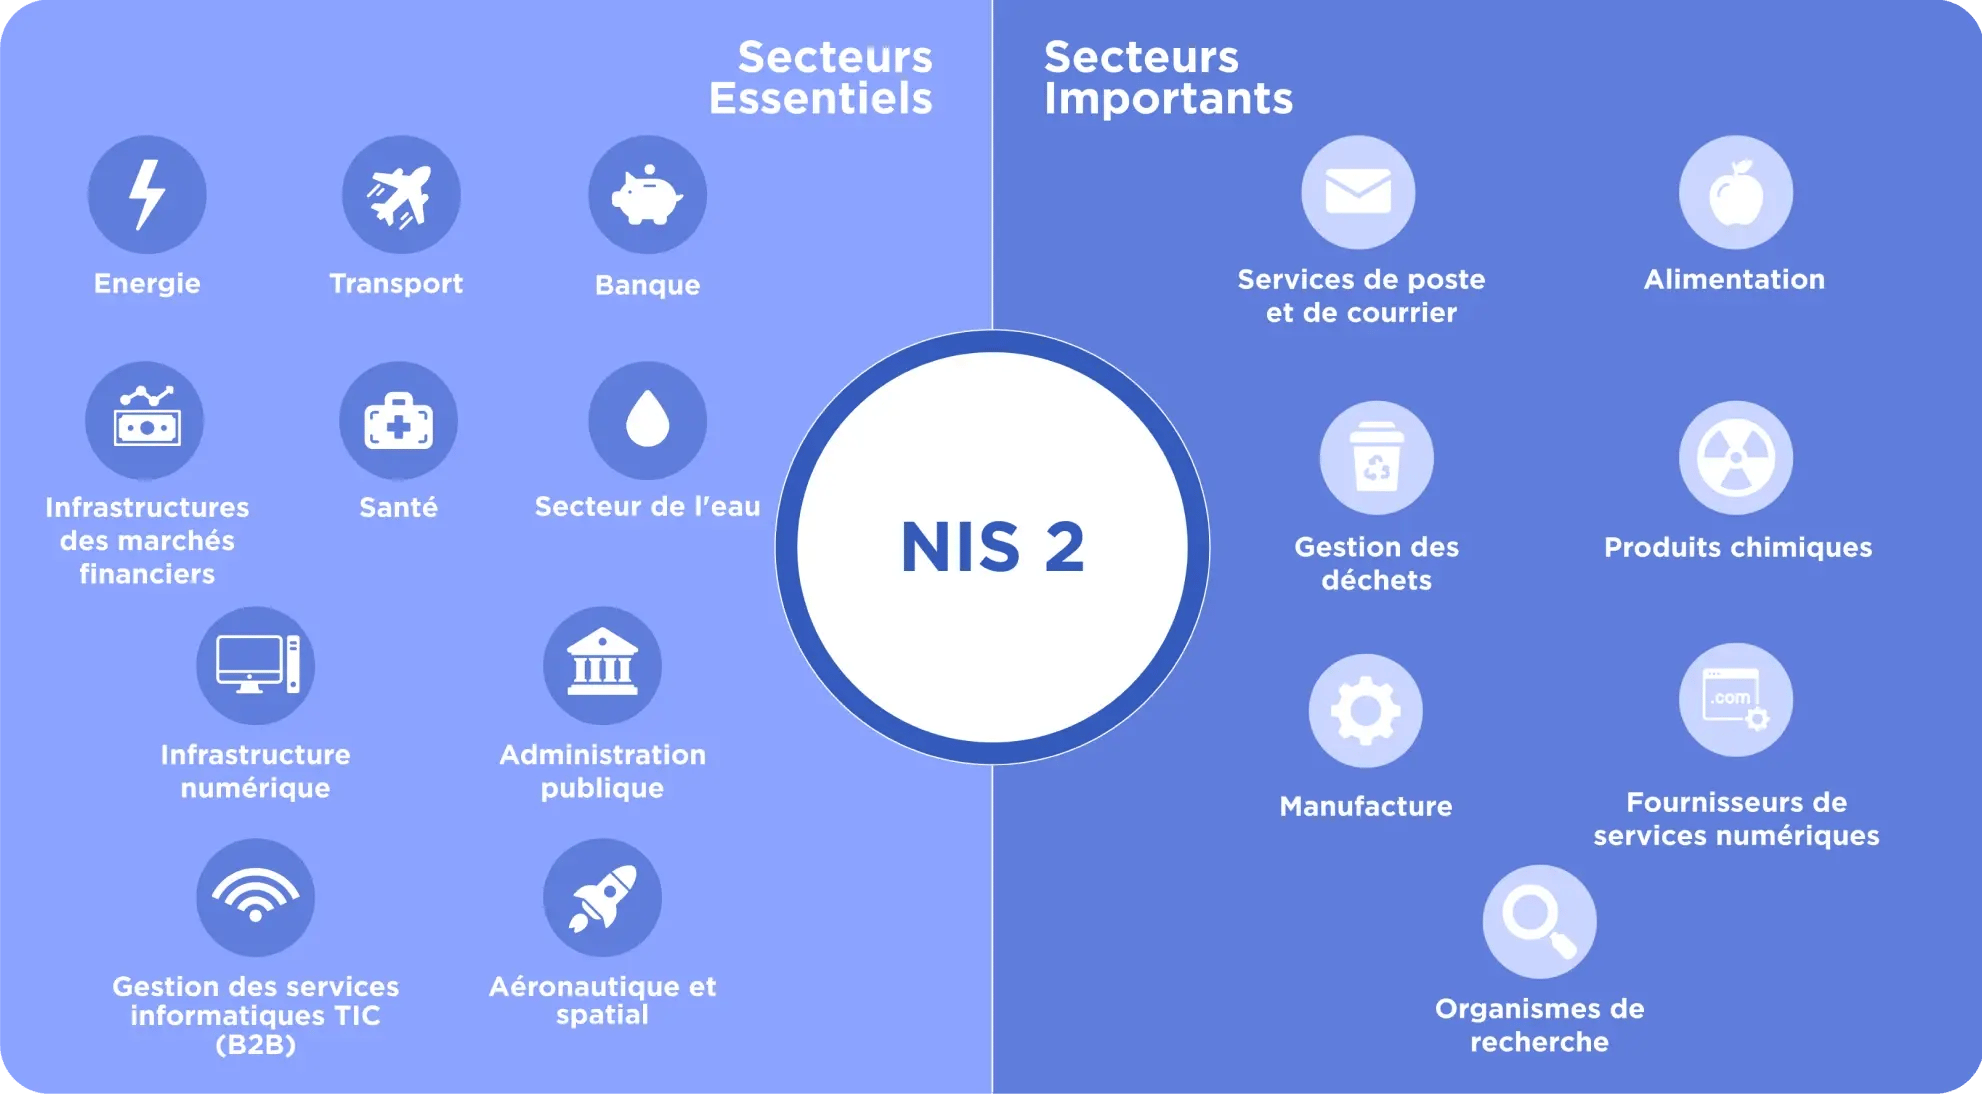 NIS 2 Sectors Infographic FR